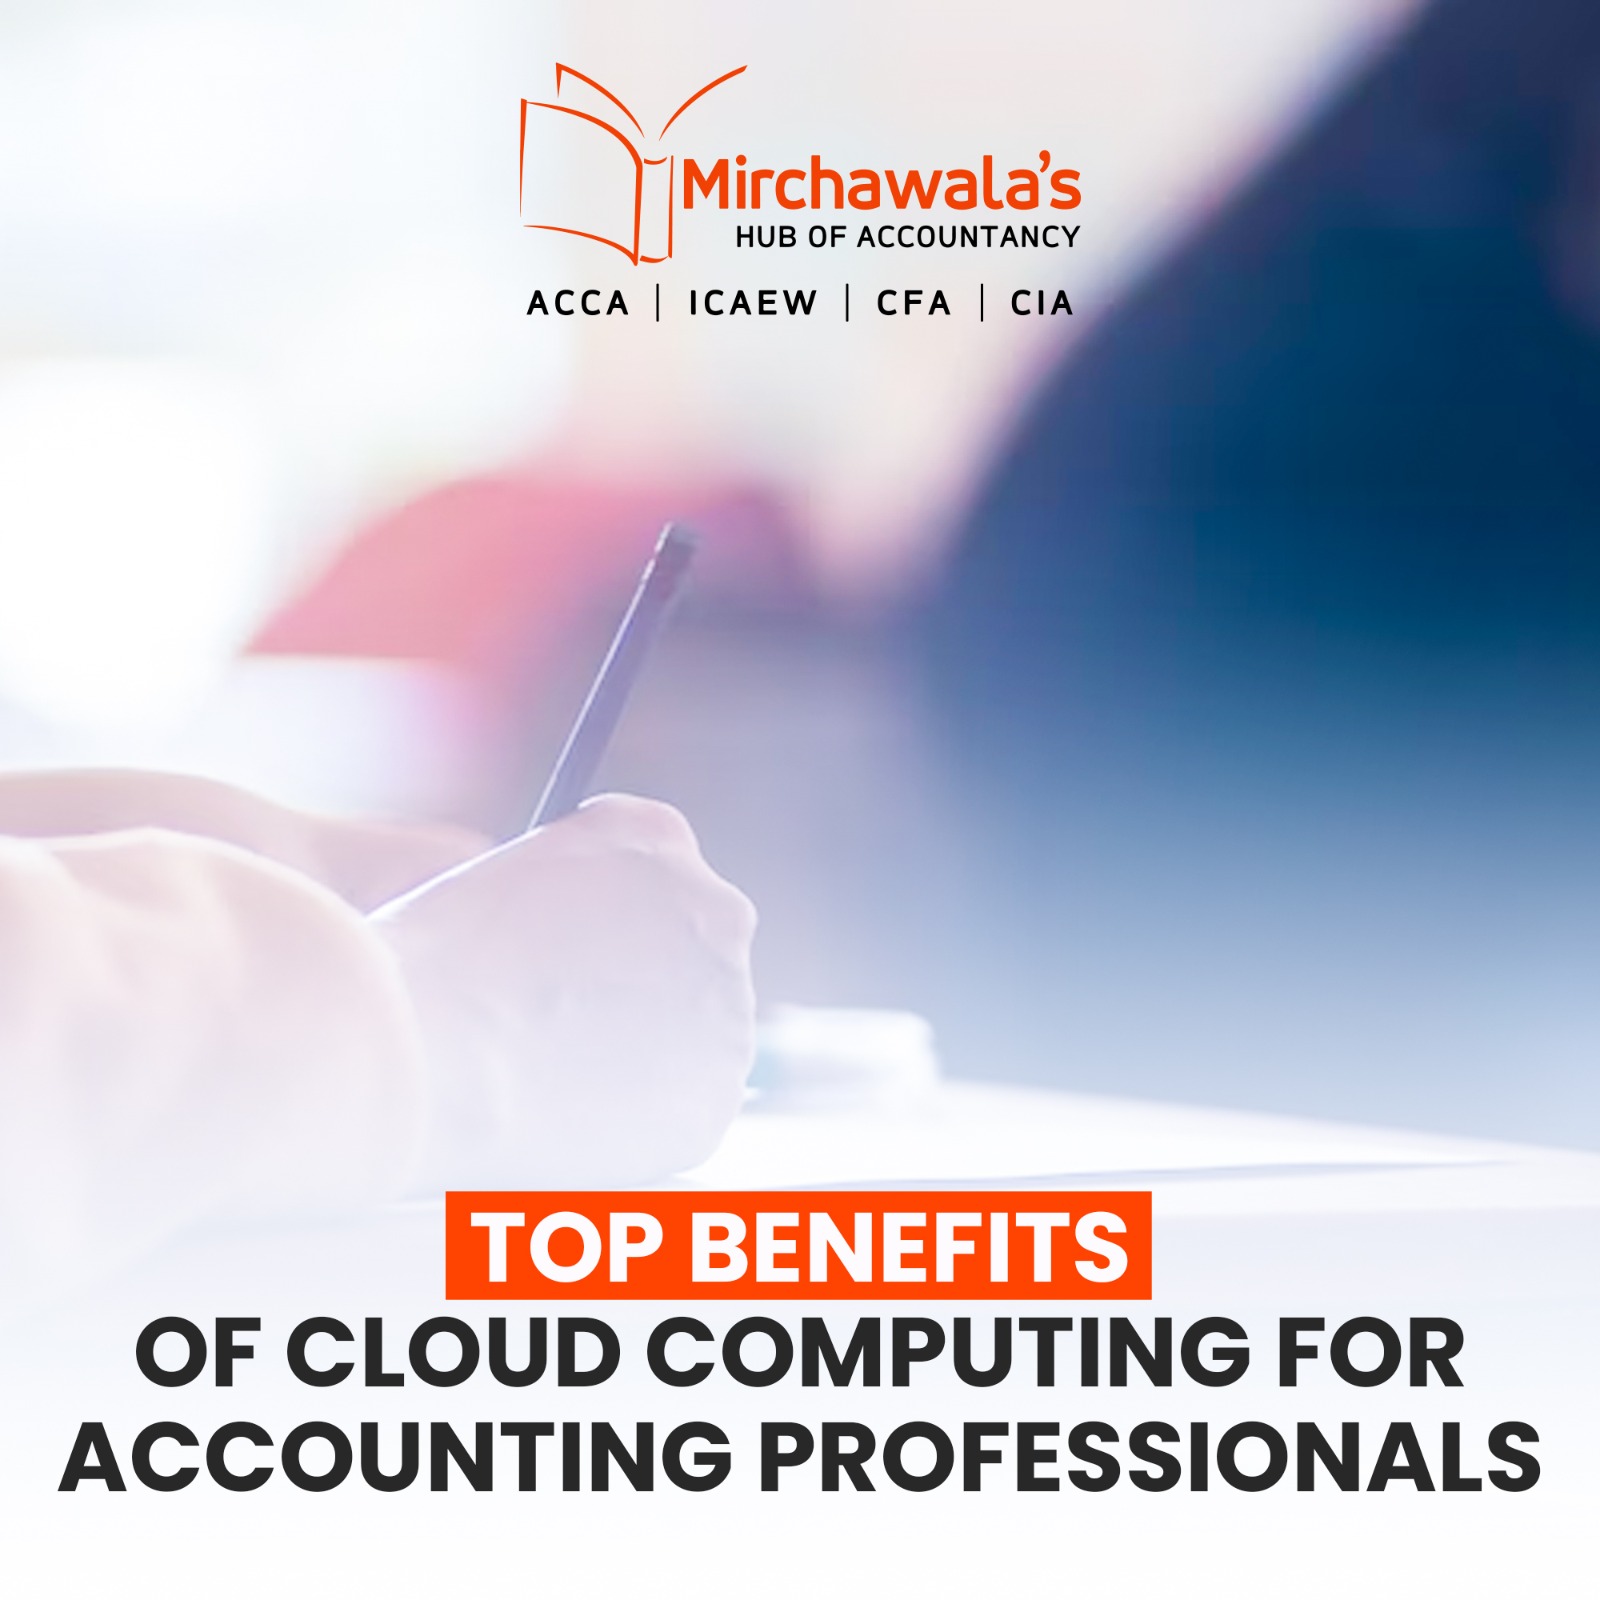 Top Benefits of Cloud Computing for Accounting Professionals